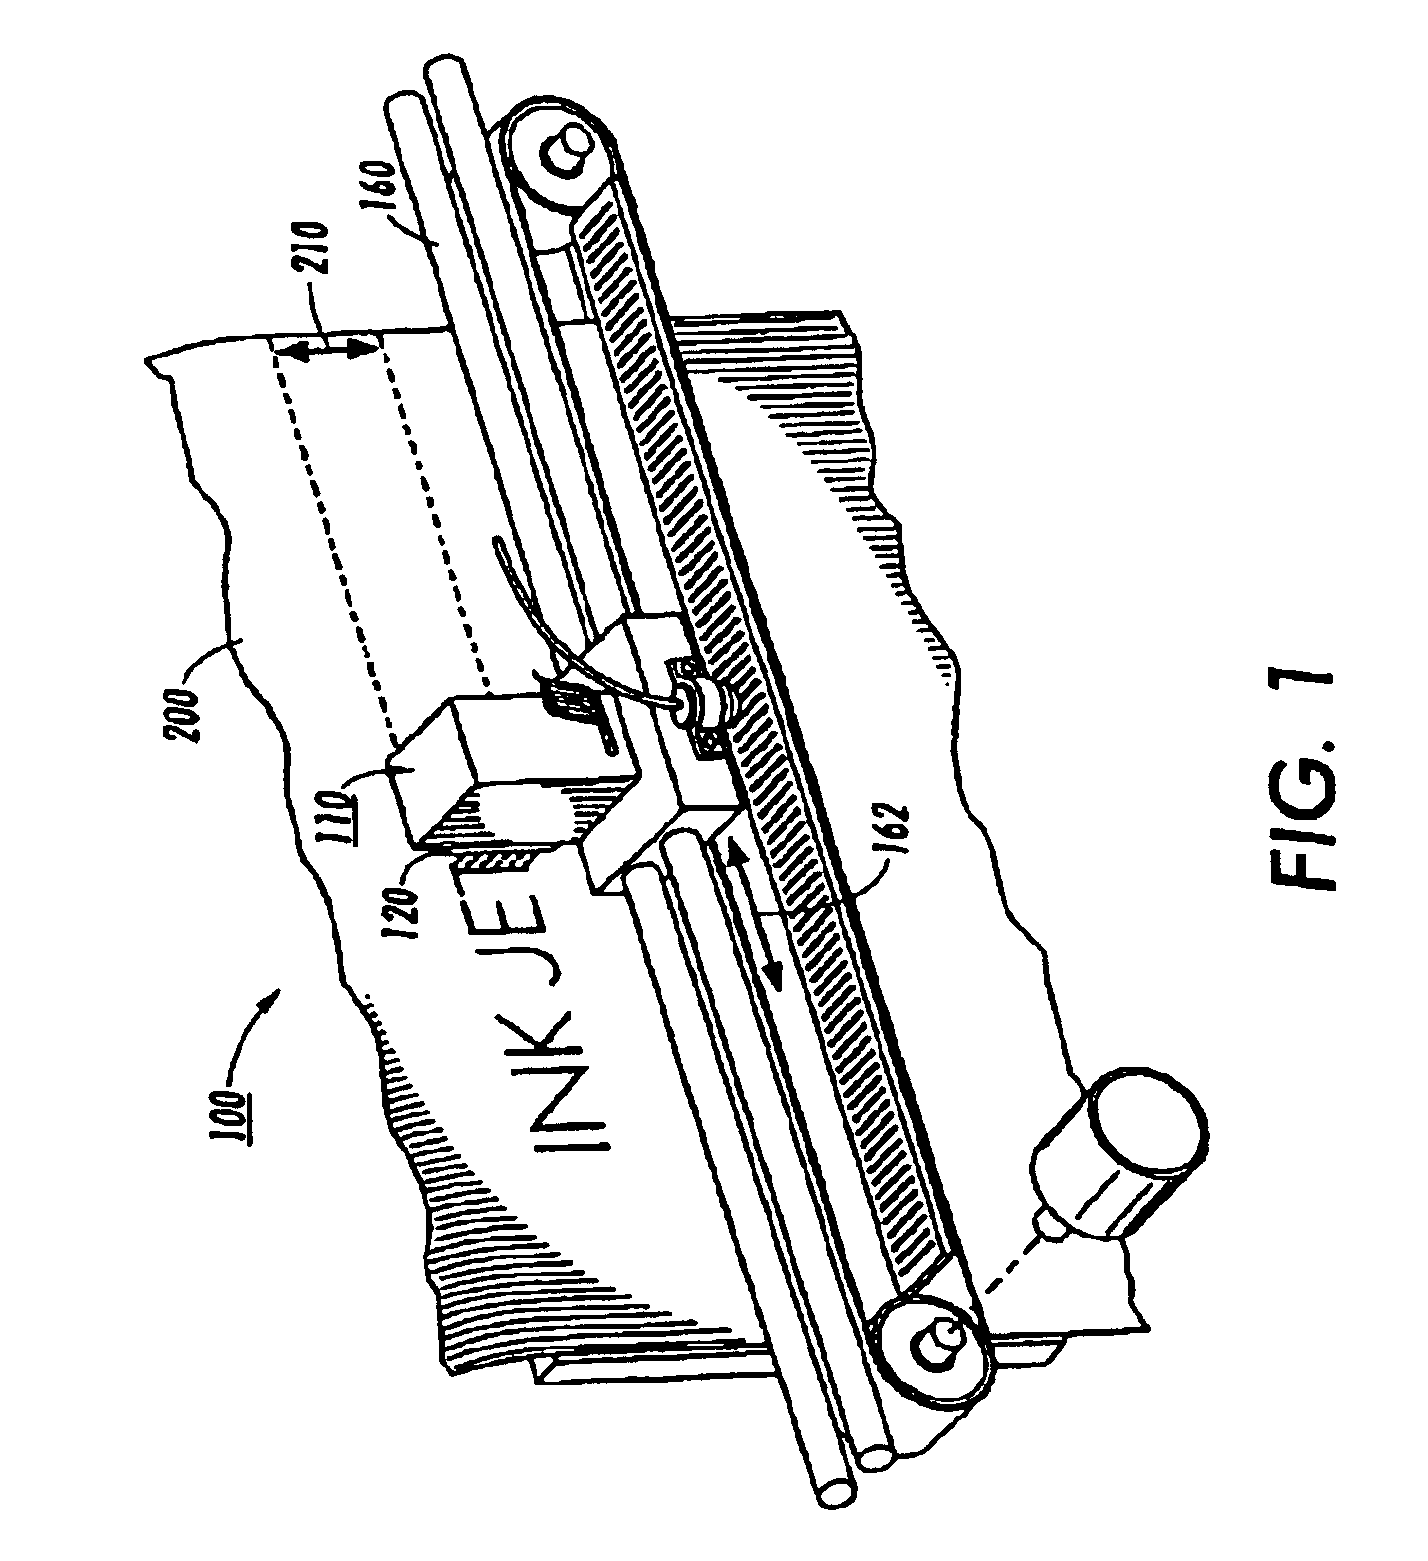 Systems and methods for operating fluid ejection systems using a print head preparatory firing sequence